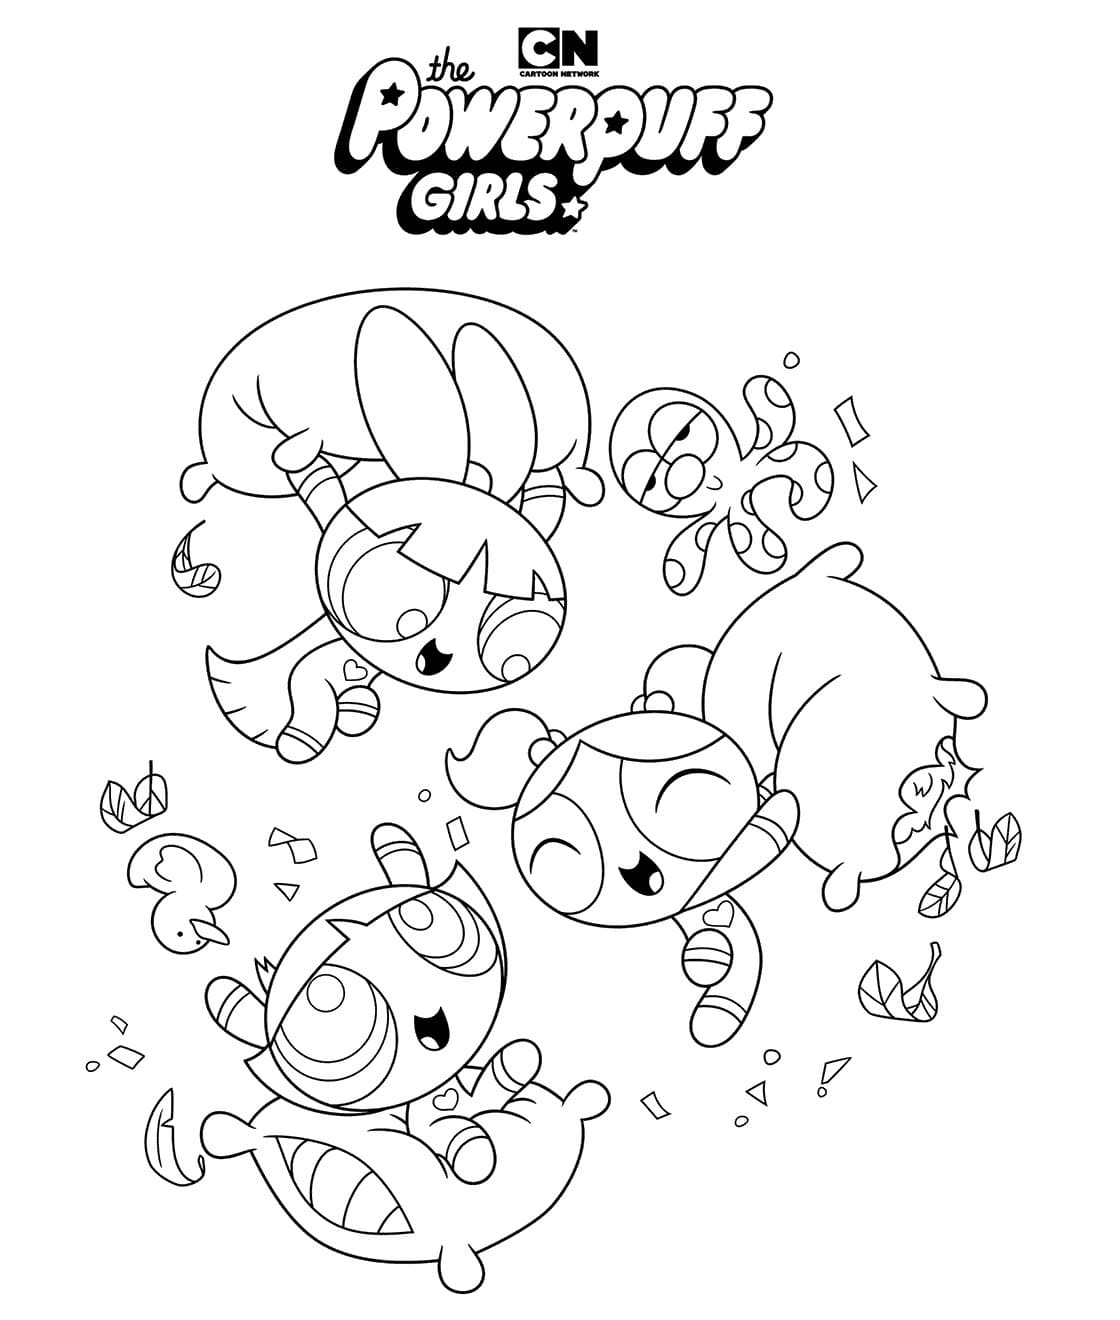 Cartoon Network Coloring Pages   20 Free Coloring pages